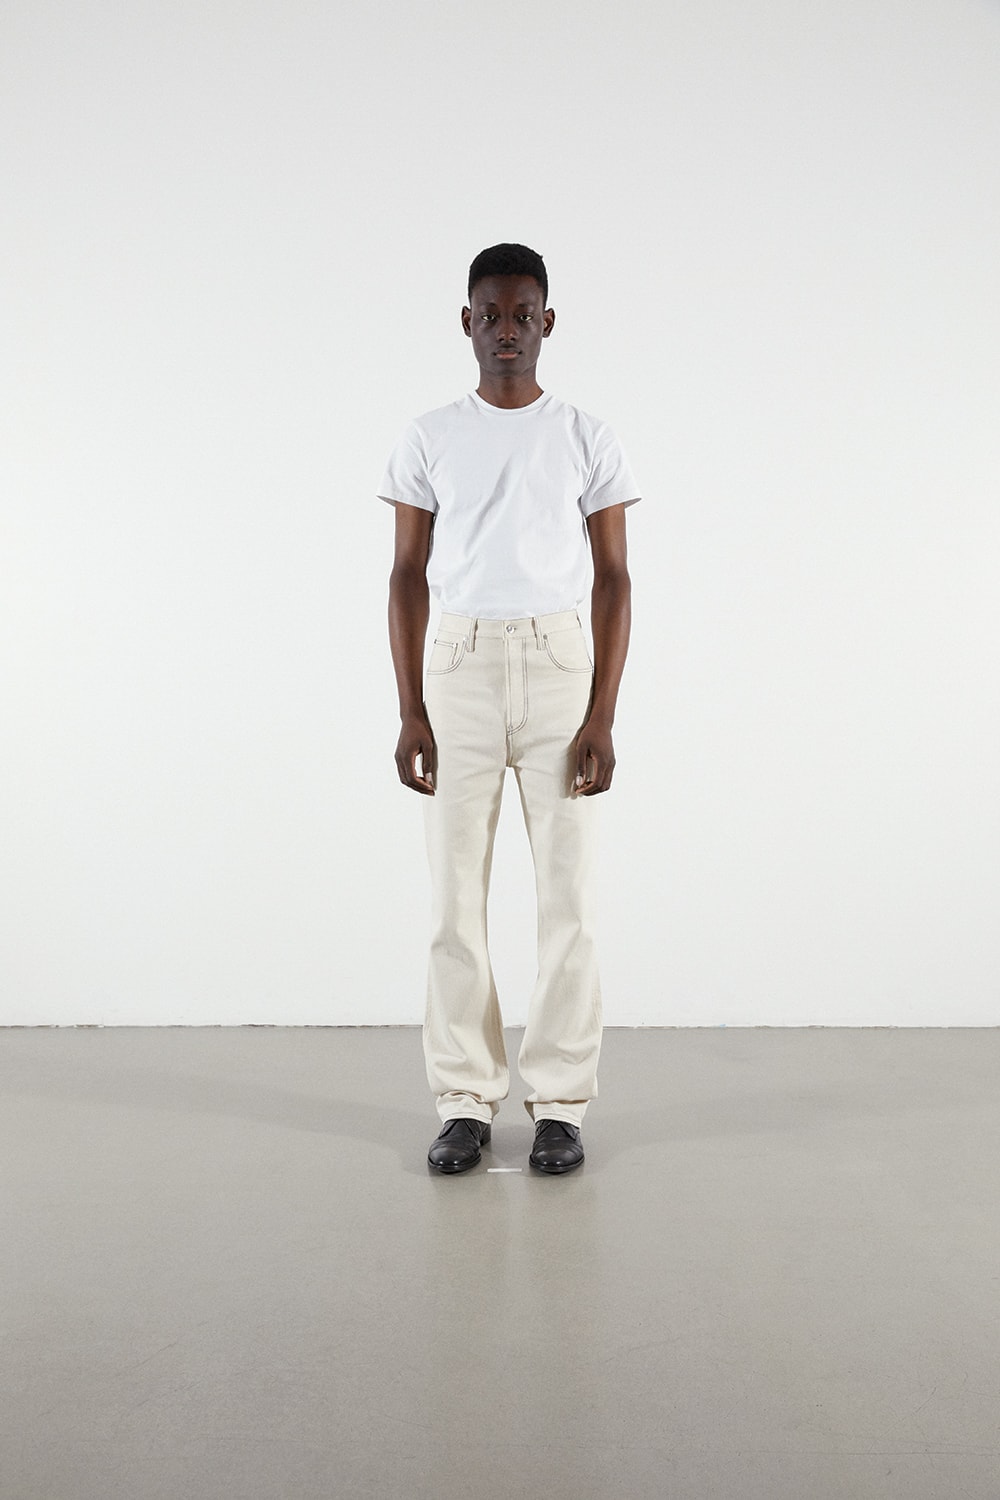 Helmut Lang Painter Jeans: The Trousers that Changed Denim